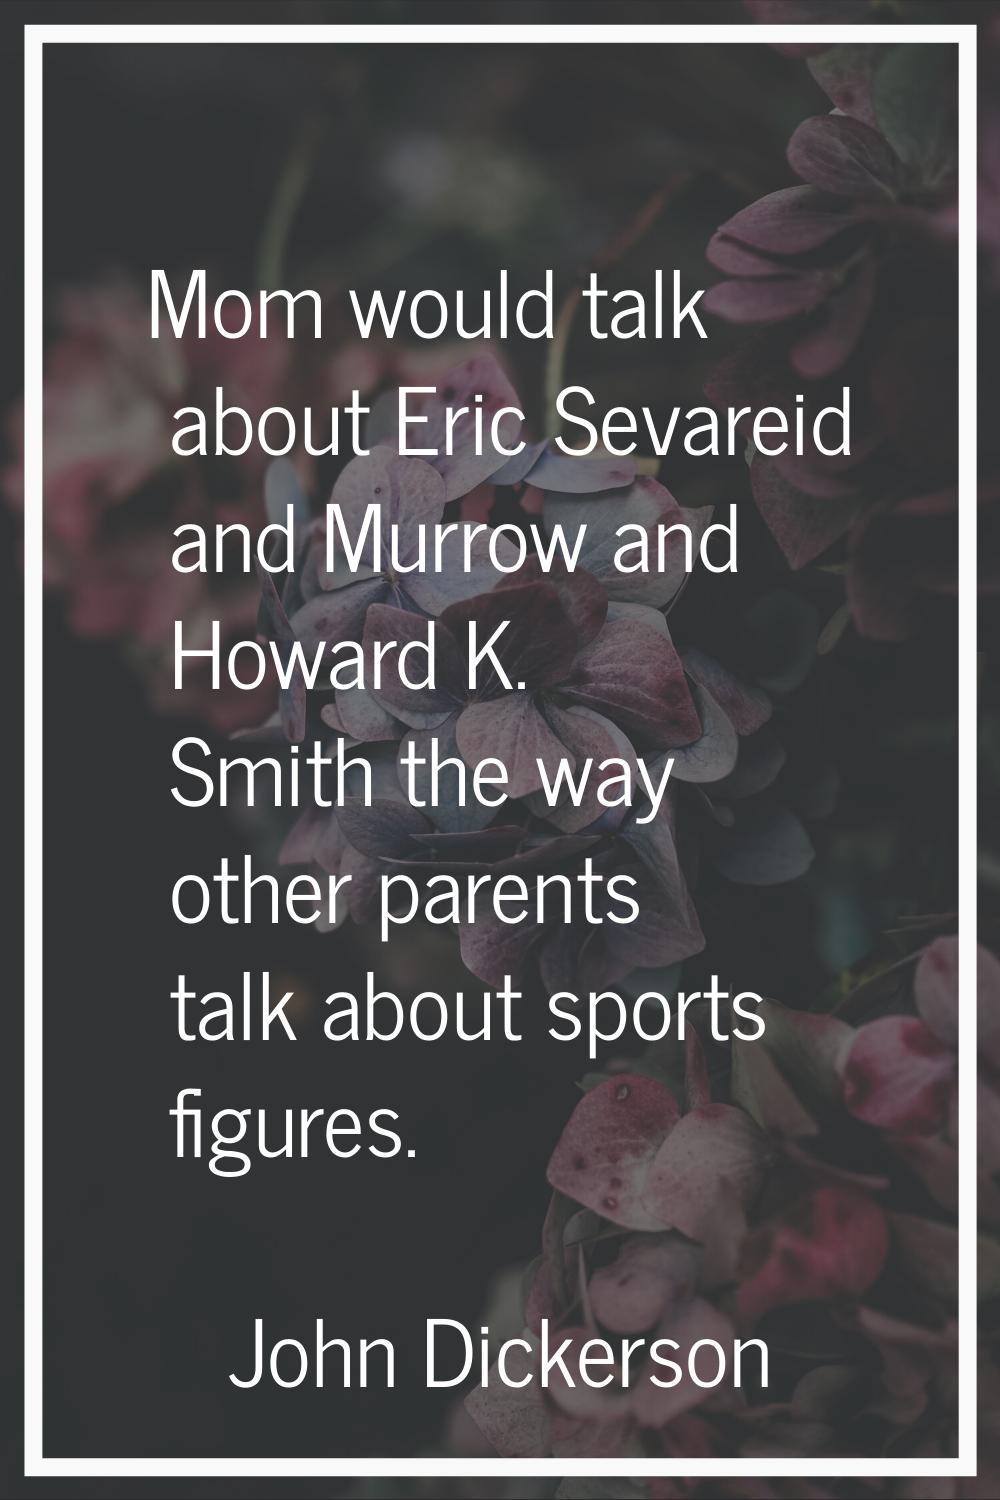 Mom would talk about Eric Sevareid and Murrow and Howard K. Smith the way other parents talk about 